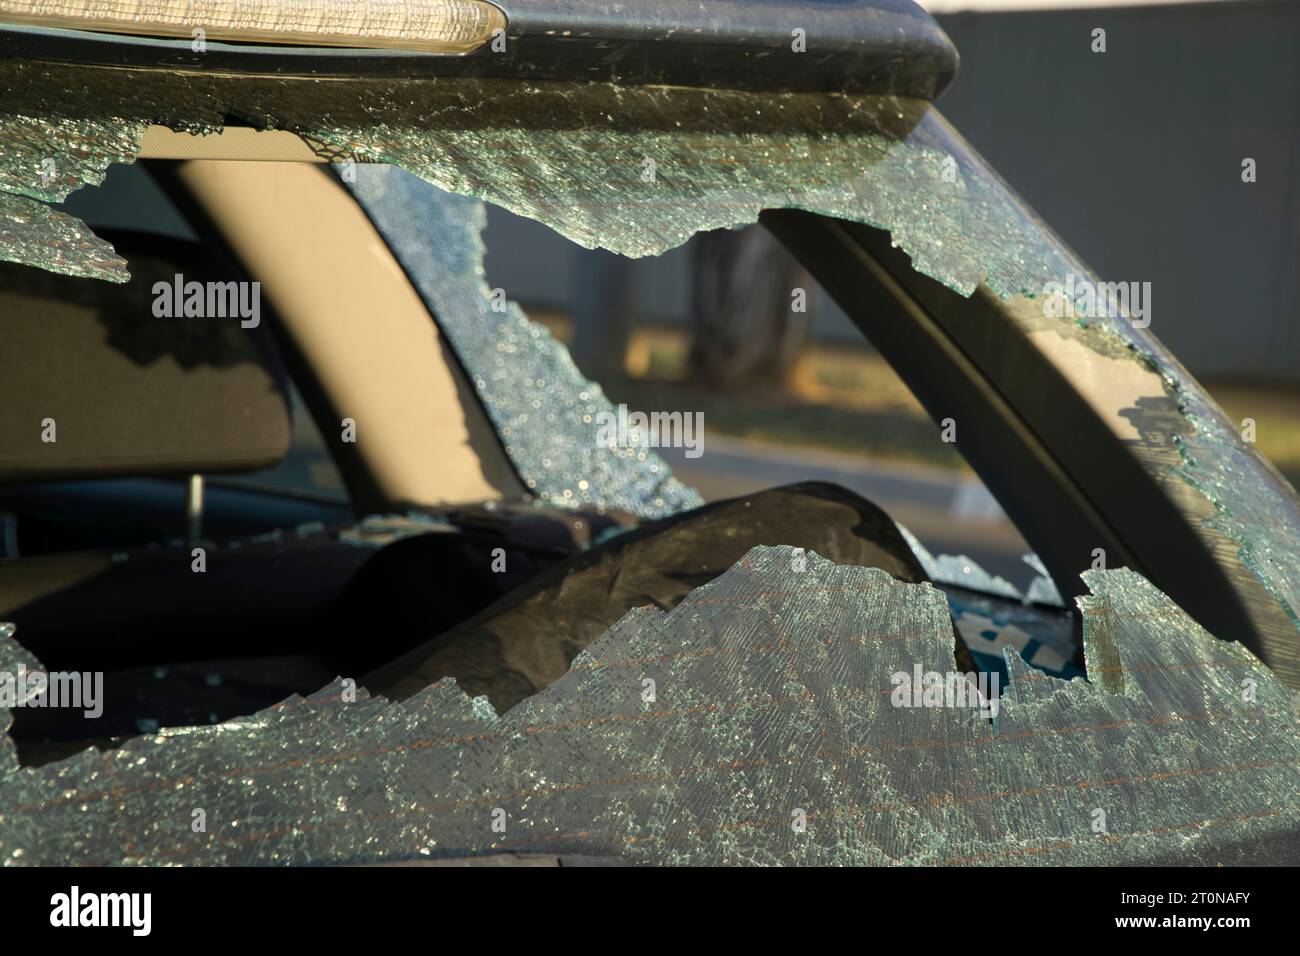 The vandalised shattered broken rear and side windows on a car in the street Stock Photo